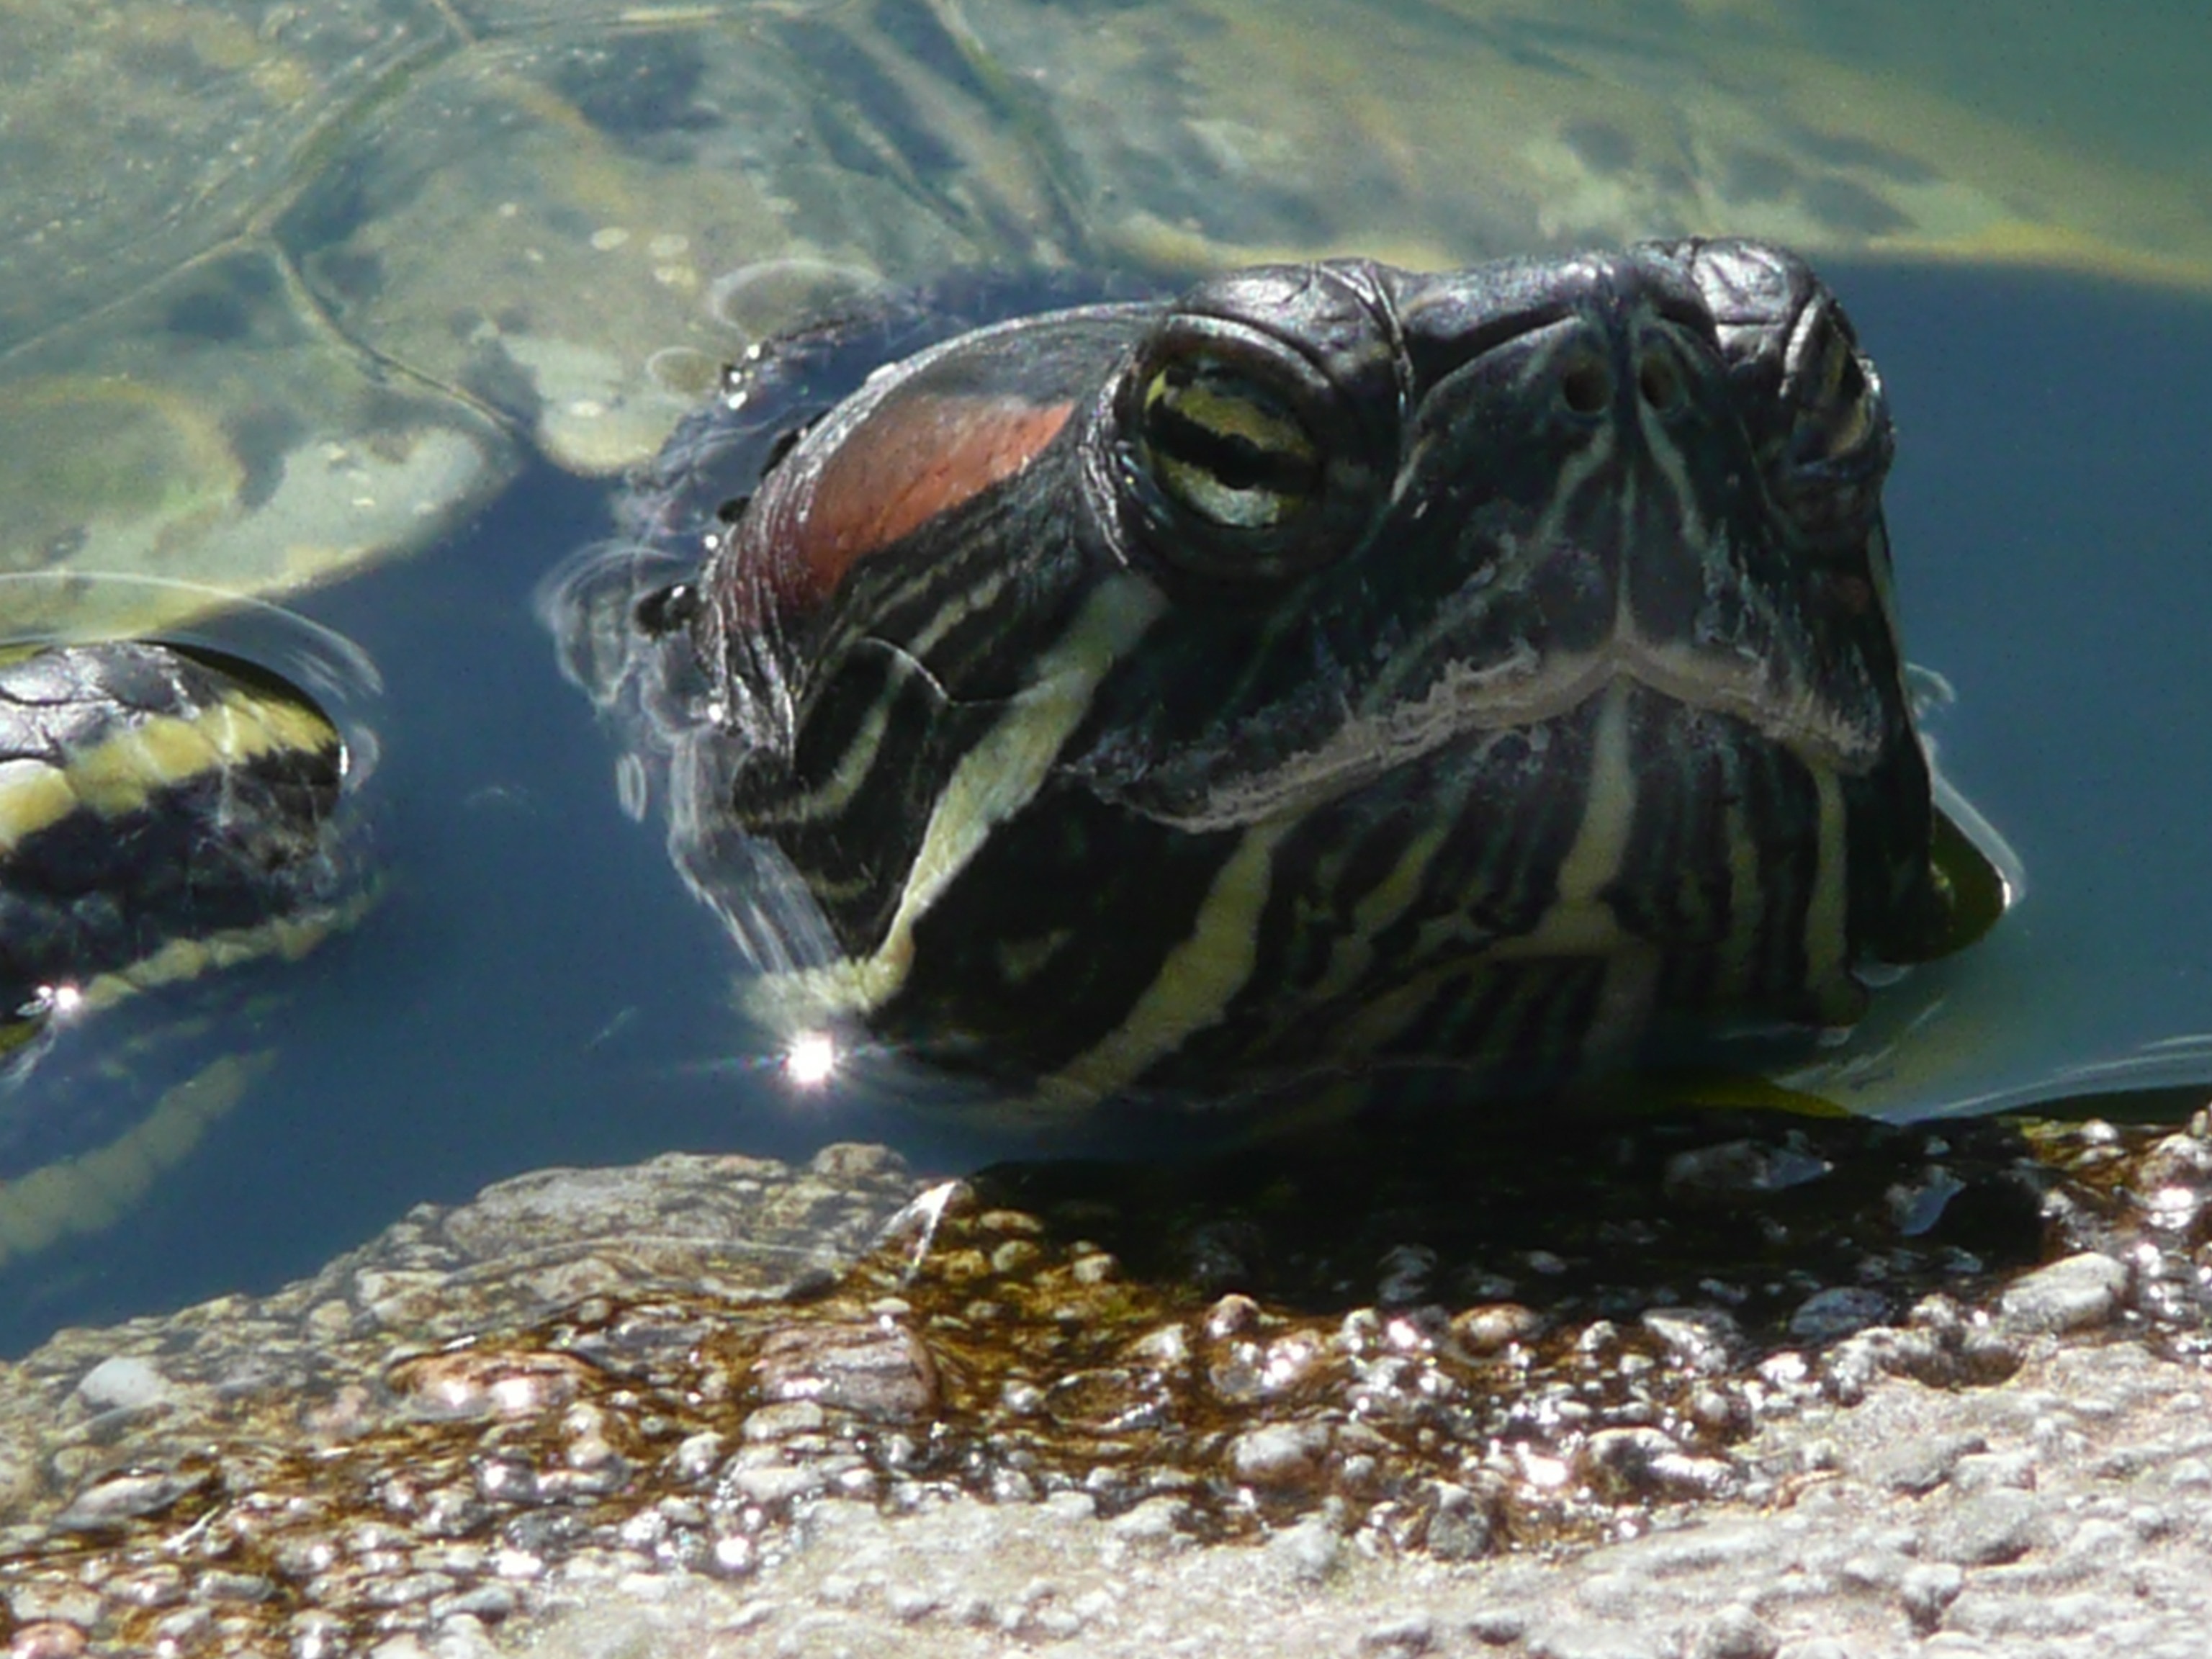 black and green turtle in water during daytime